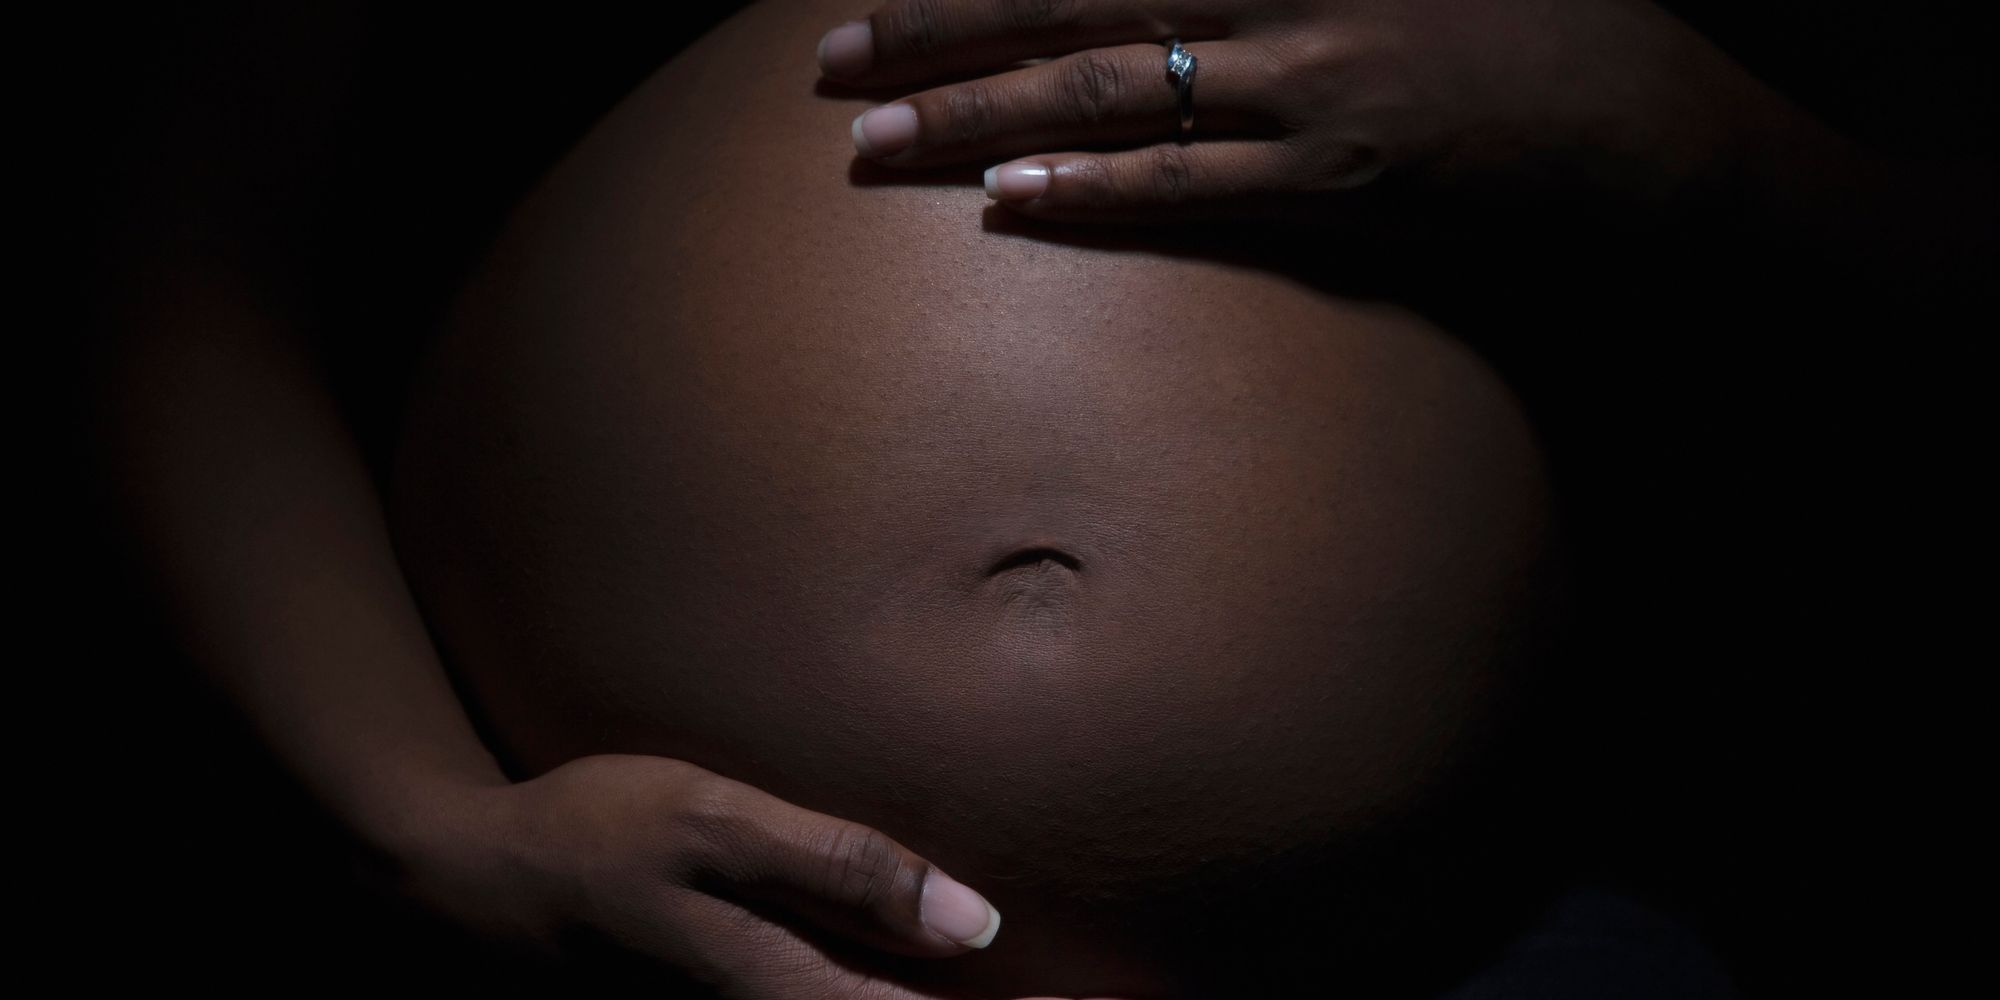 Should pregnant drug users be prosecuted